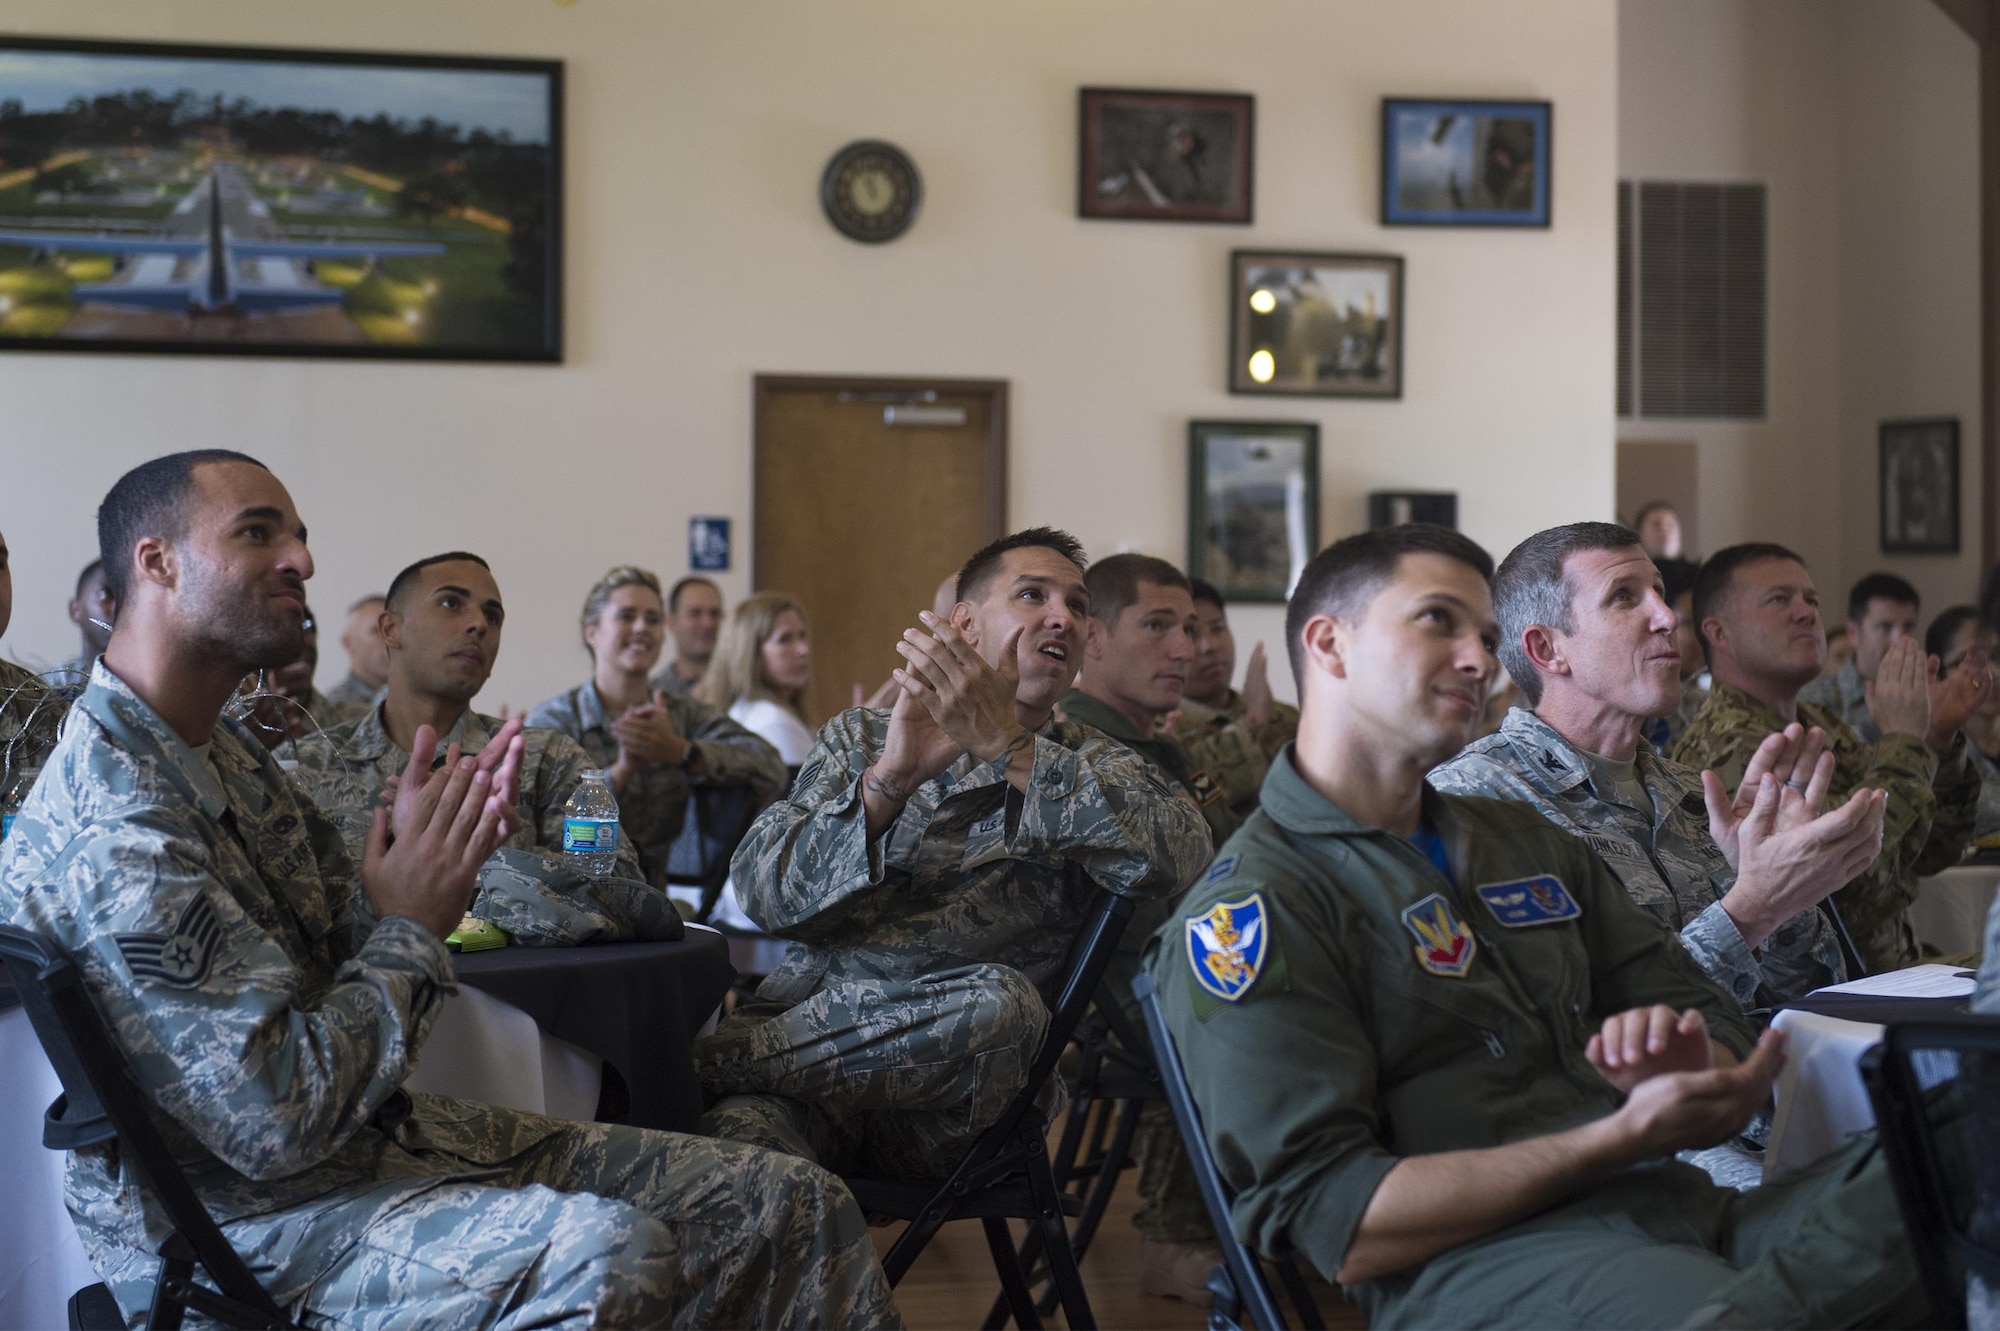 Moody Airmen applaud a video montage during the 2017 Emerge Moody, Leadership Moody graduation ceremony, June 23, 2017 at Moody Air Force Base, Ga. Approximately 30 distinguished Airmen accepted honors during the nine-month program, Emerge Moody students broadened their view of how they fit into the overall Moody and larger Air Force mission, while Leadership students learned local community agencies' best practices and challenges of leaders from non-military perspectives. (U.S. Air Force photo by Senior Airman Greg Nash)